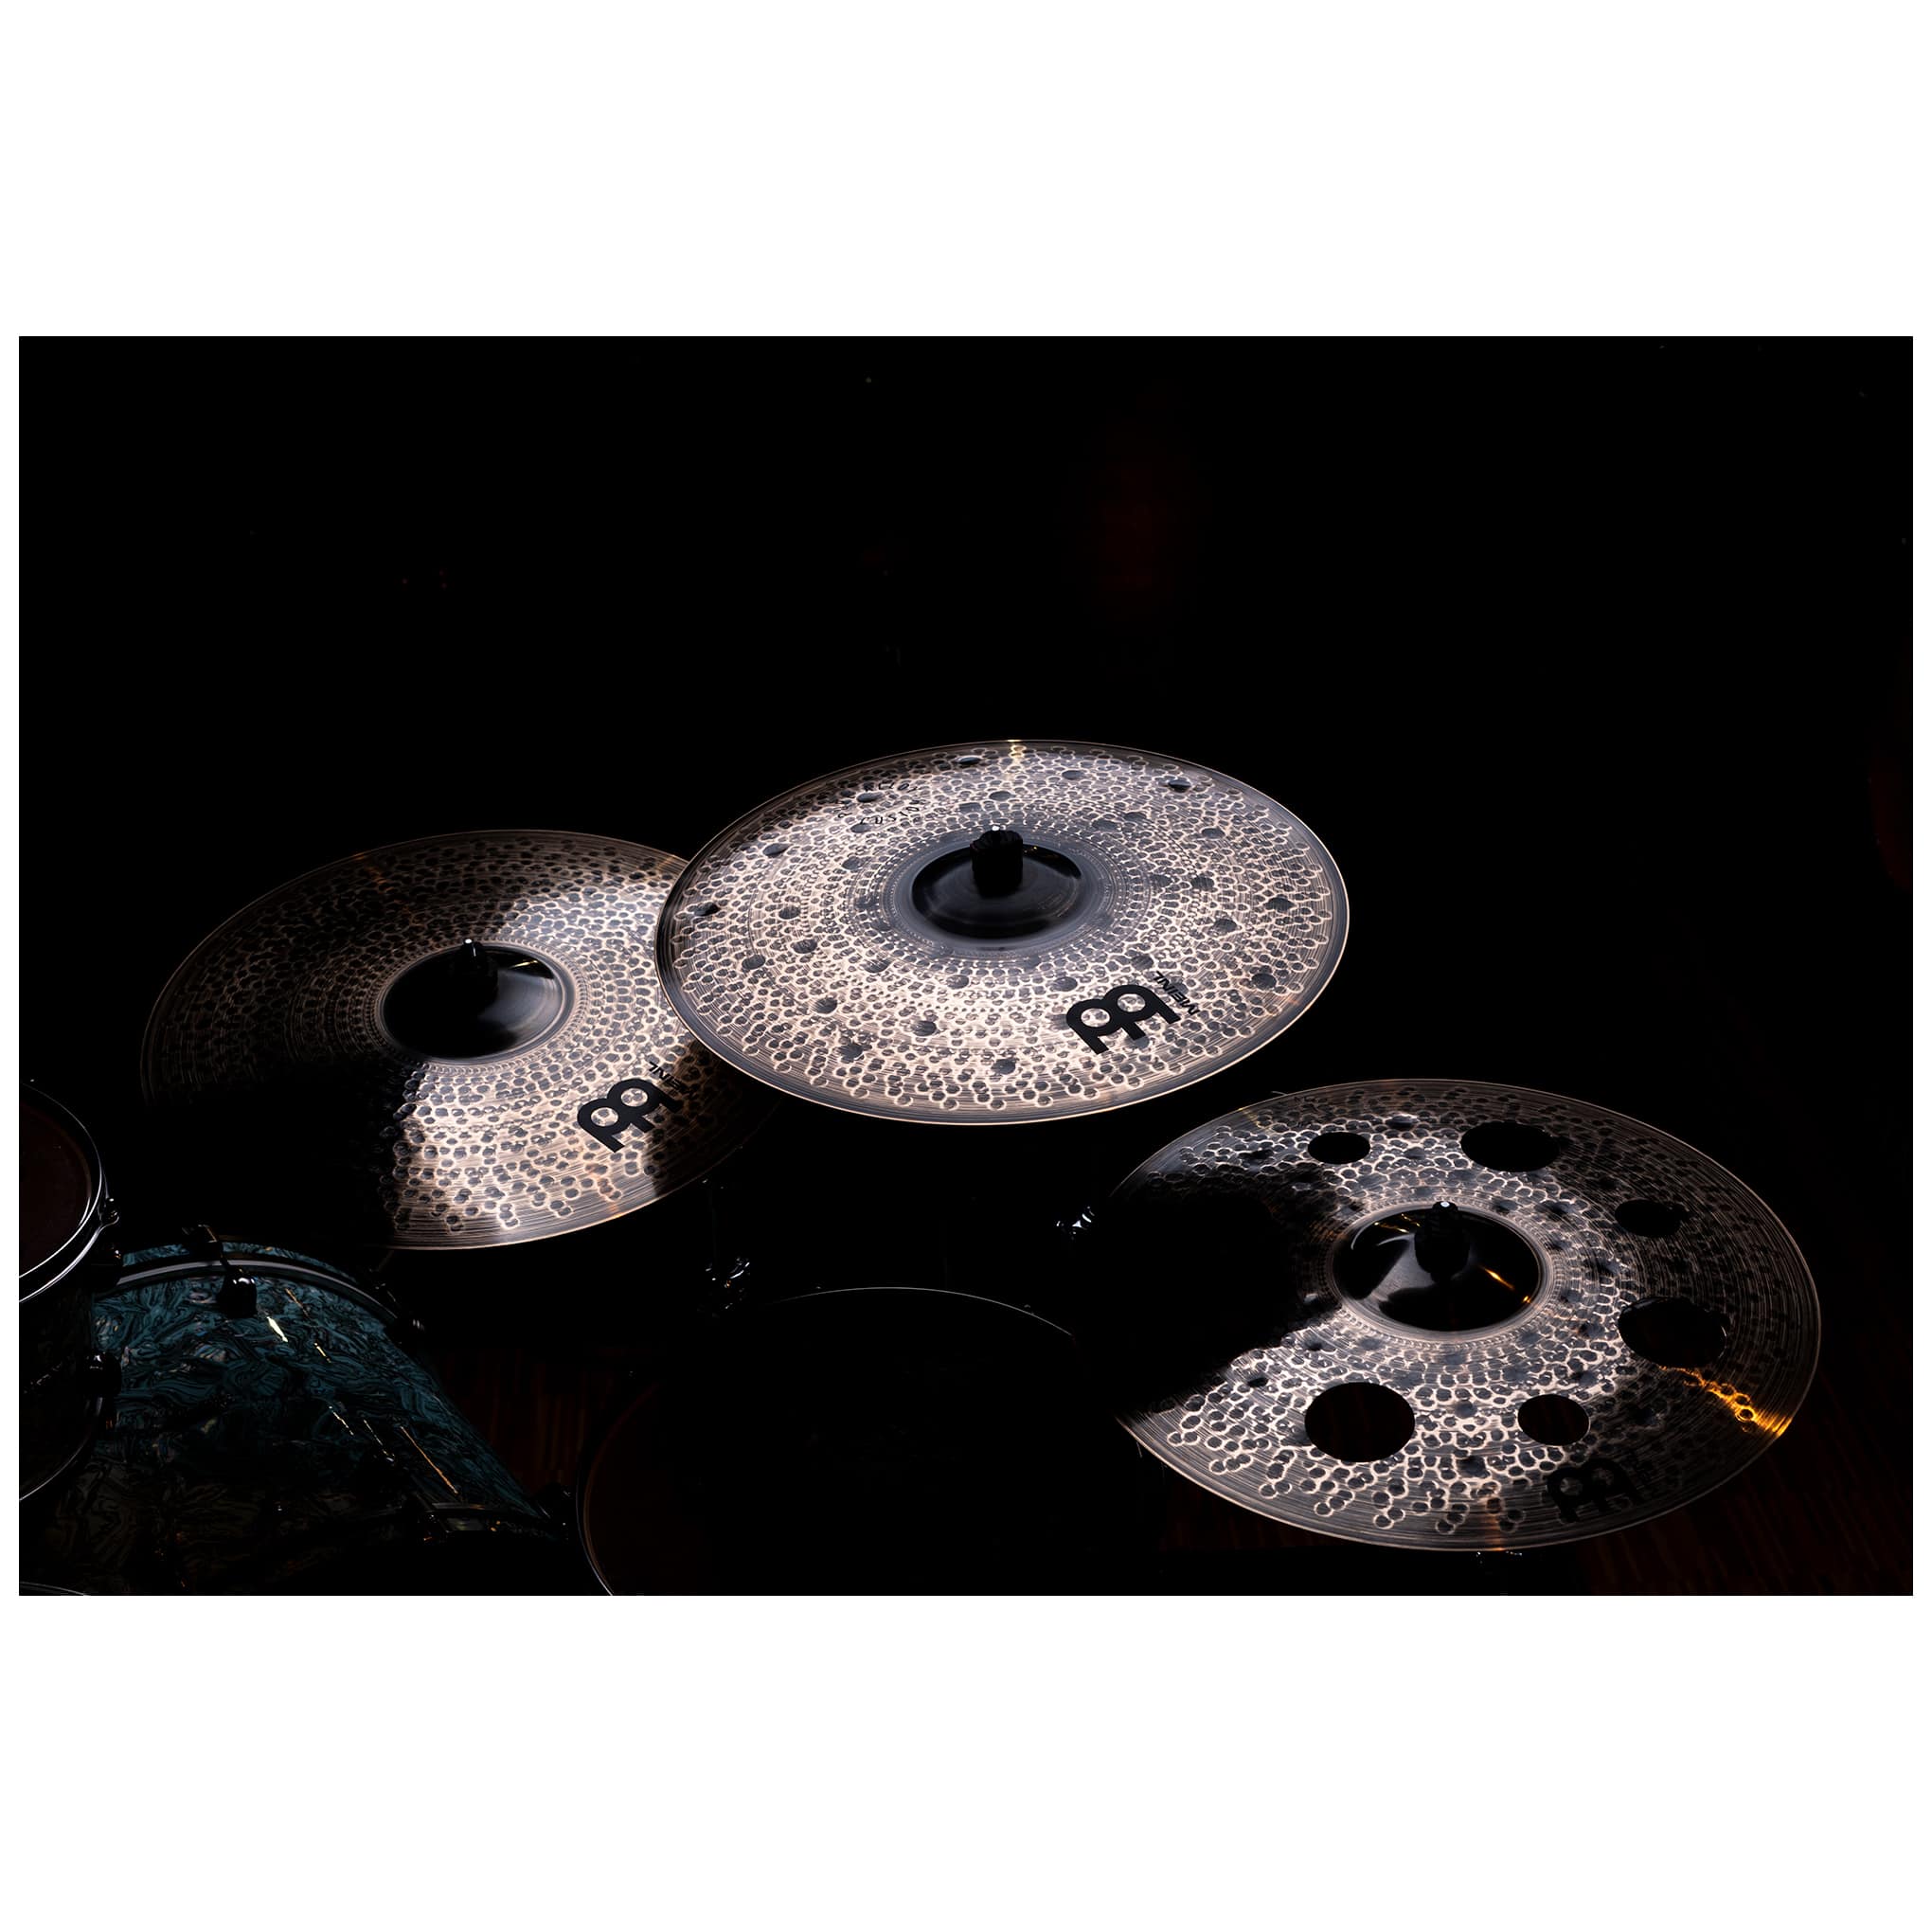 Meinl Cymbals PAC20ETHC - 20" Pure Alloy Custom Extra Thin Hammered Crash 8